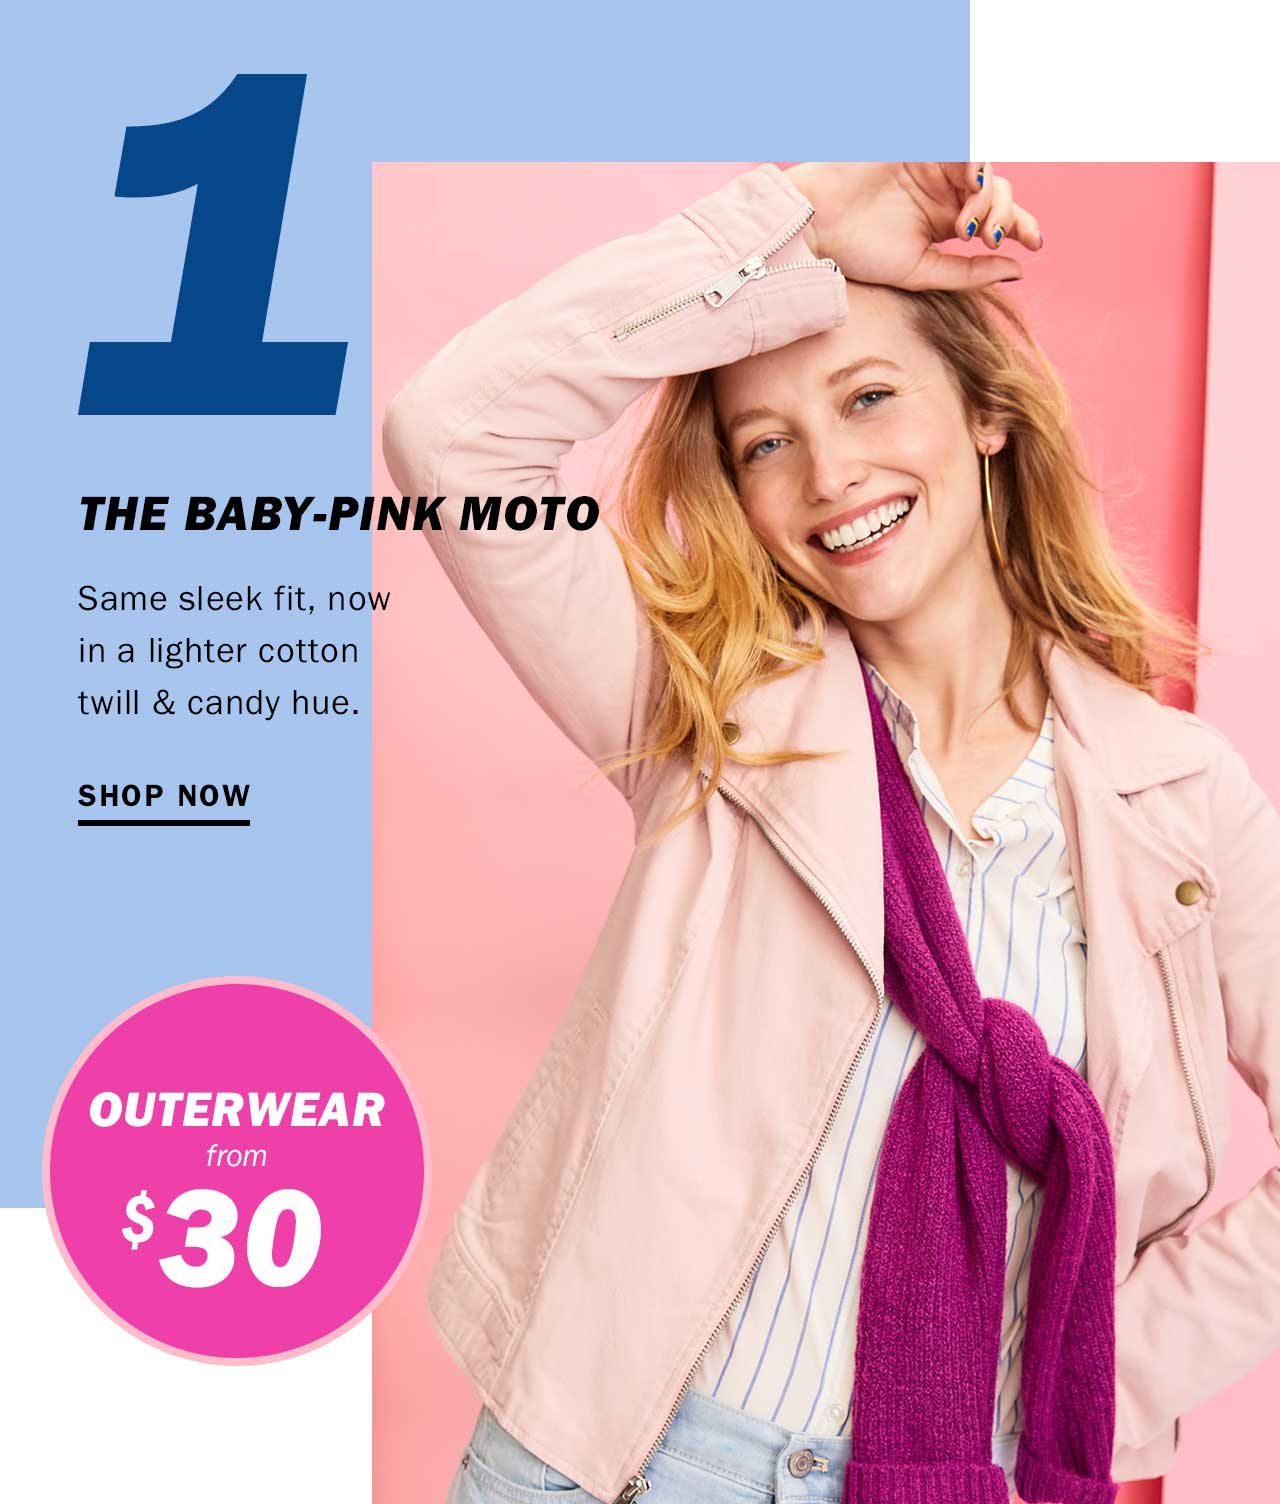 1 | The baby-pink moto